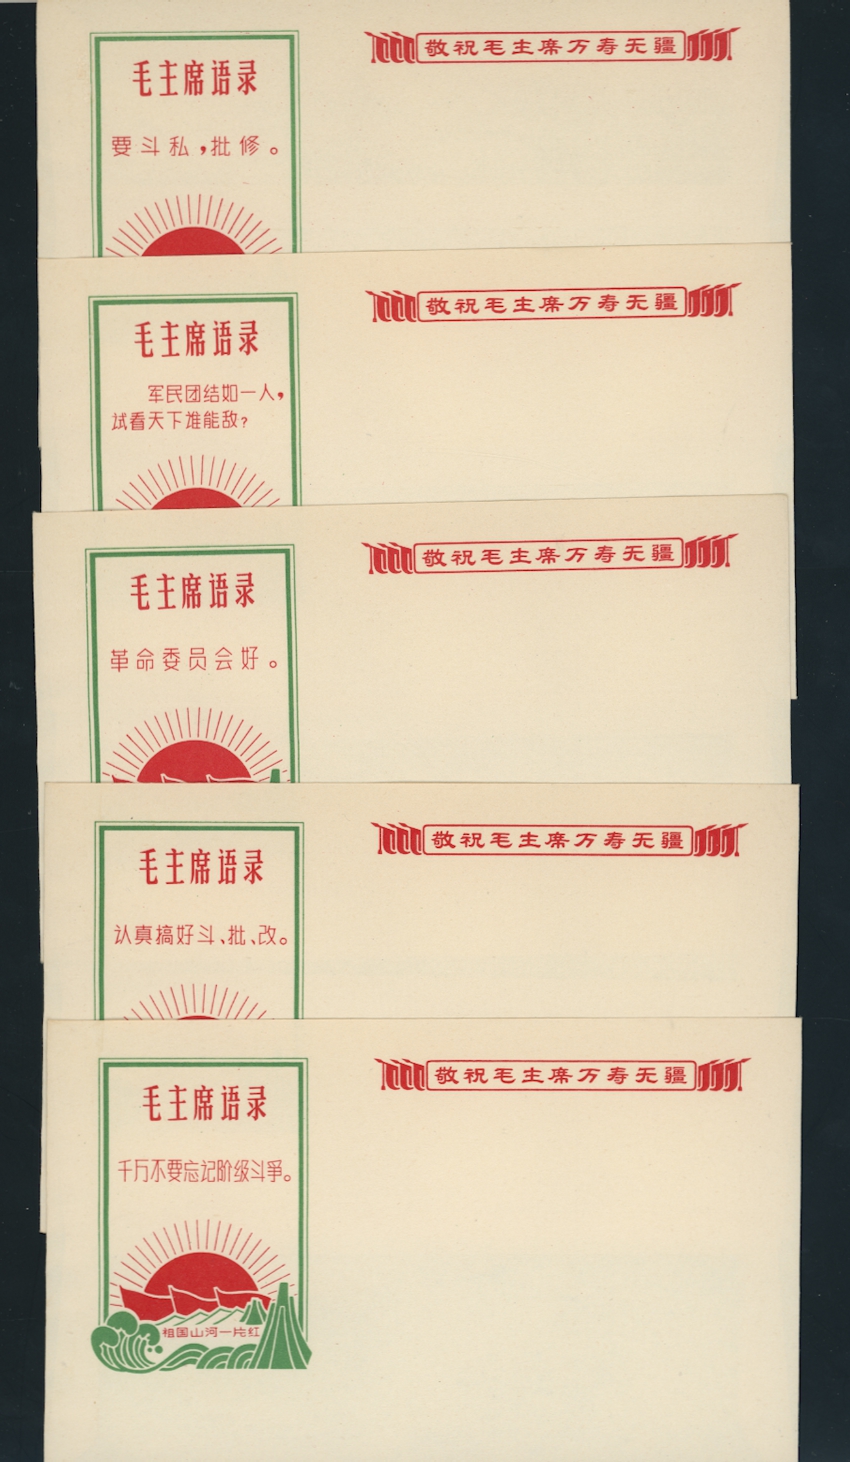 1970 July - set of five envelopes with Mao Quotations, published in Shenyang, condition varies